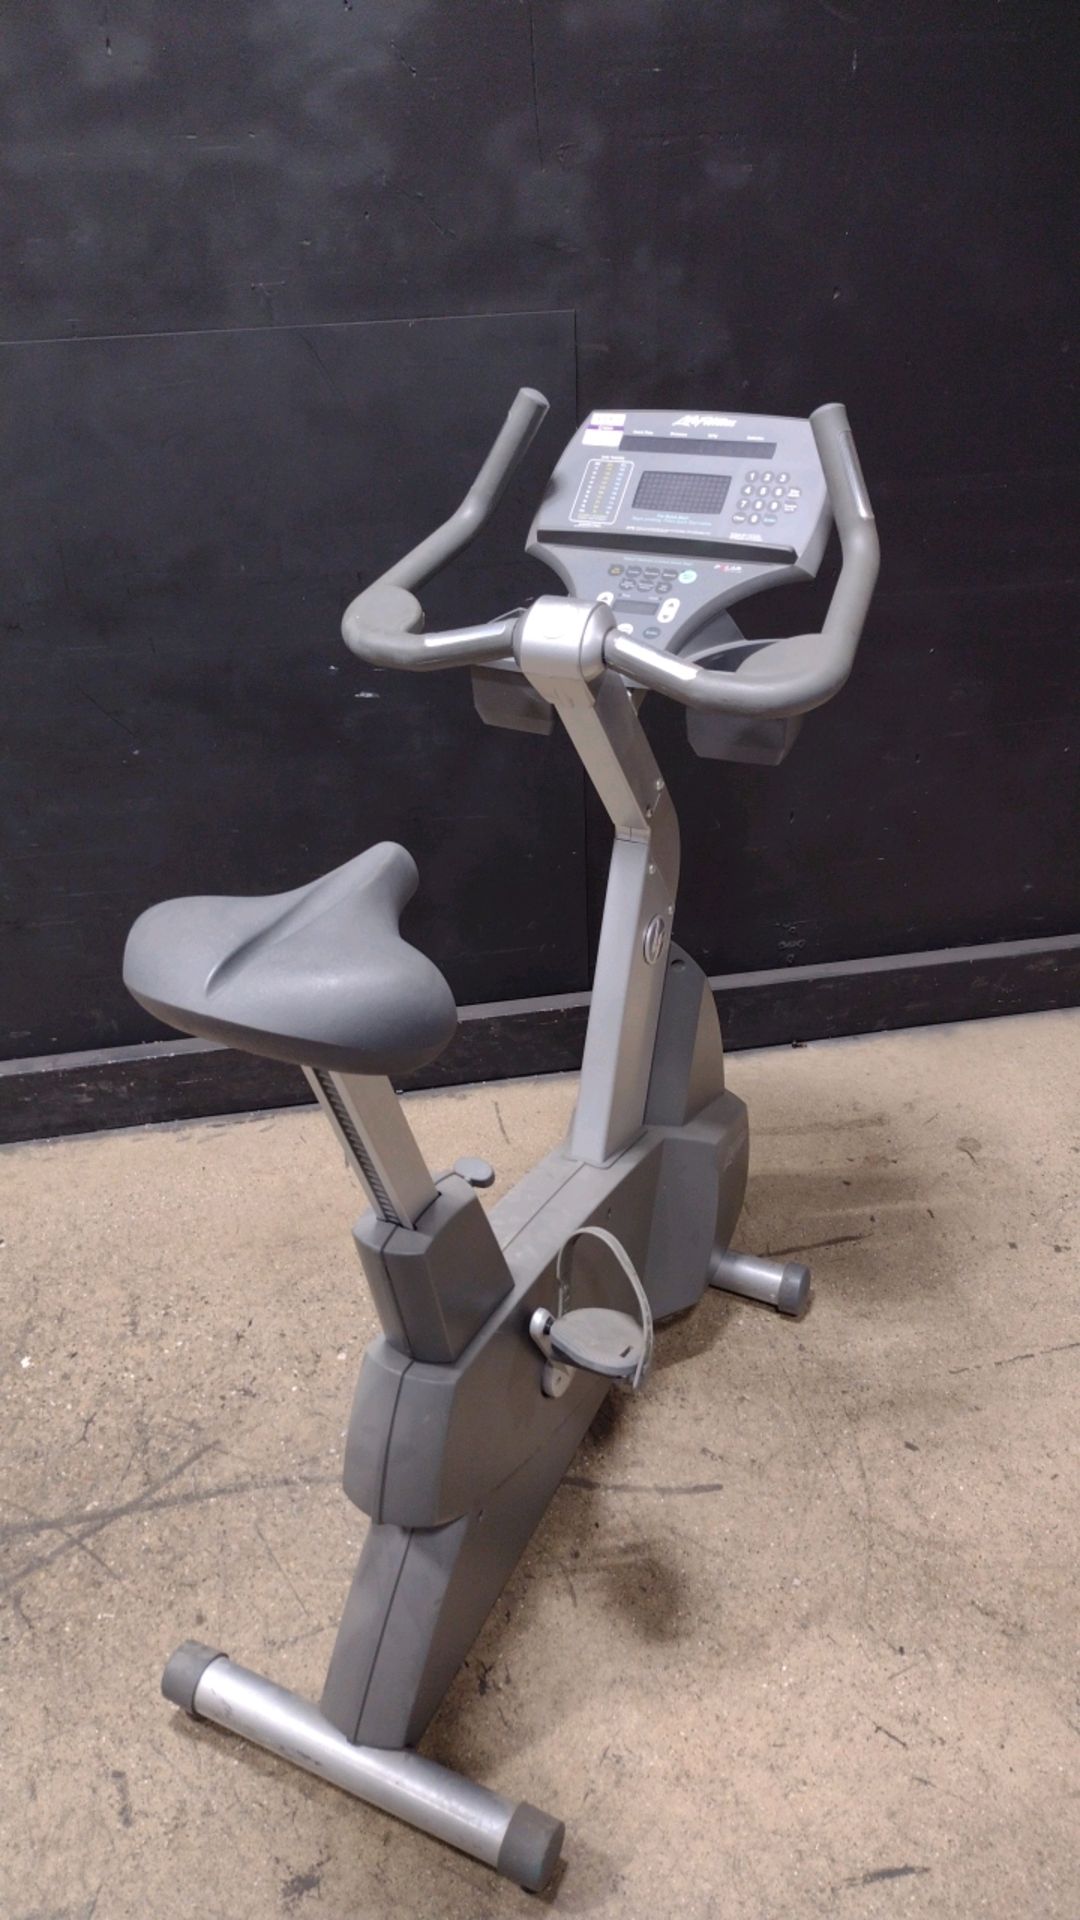 LIFE FITNESS 95CI EXERCISE BIKE (LOCATED AT 3325 MOUNT PROSPECT ROAD, FRANKLIN PARK, IL, 60131) - Image 2 of 2